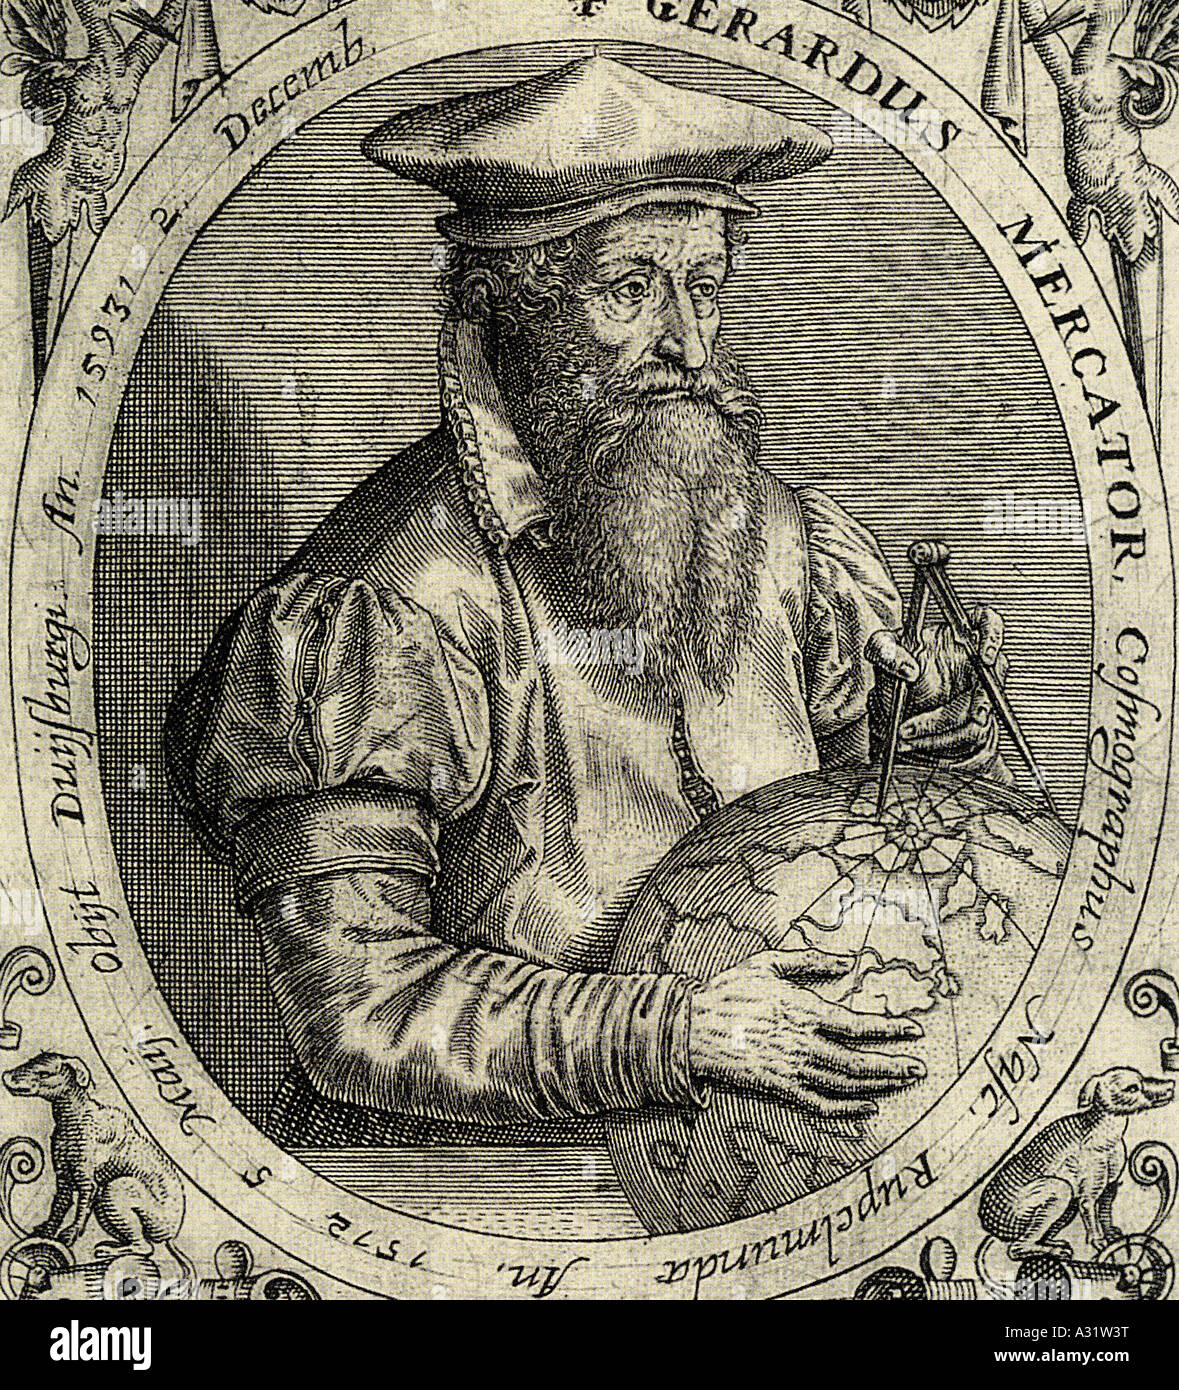 GERARDUS MERCATOR 1512 to 1594 Flemish cartographer who introduced the idea of a cylindrical plan to map the globe Stock Photo